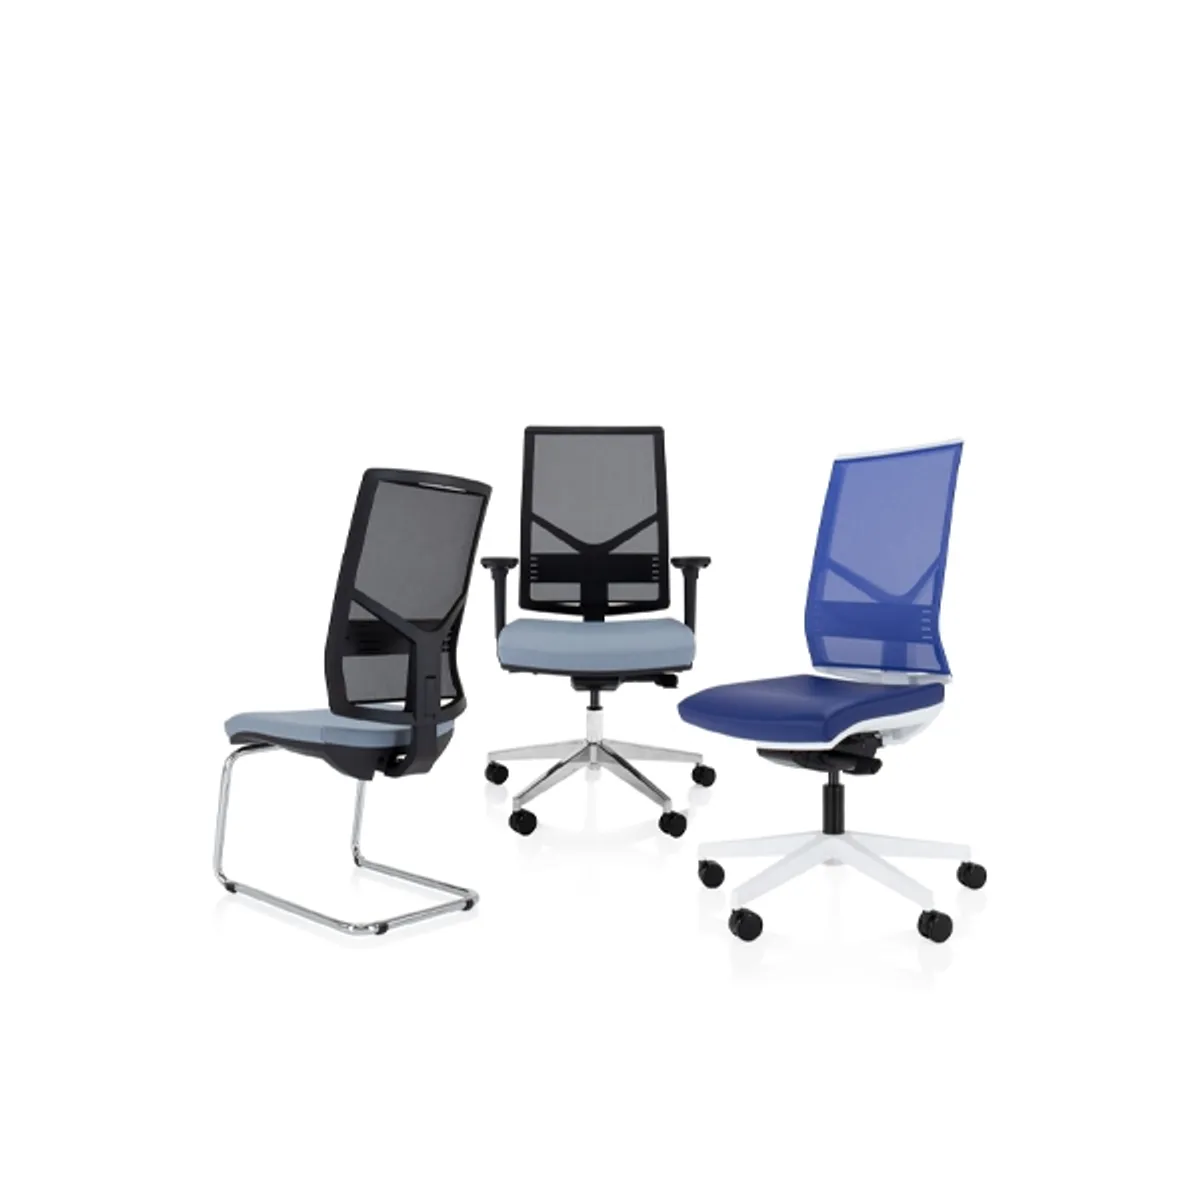 Stir task chair Inside Out Contracts5